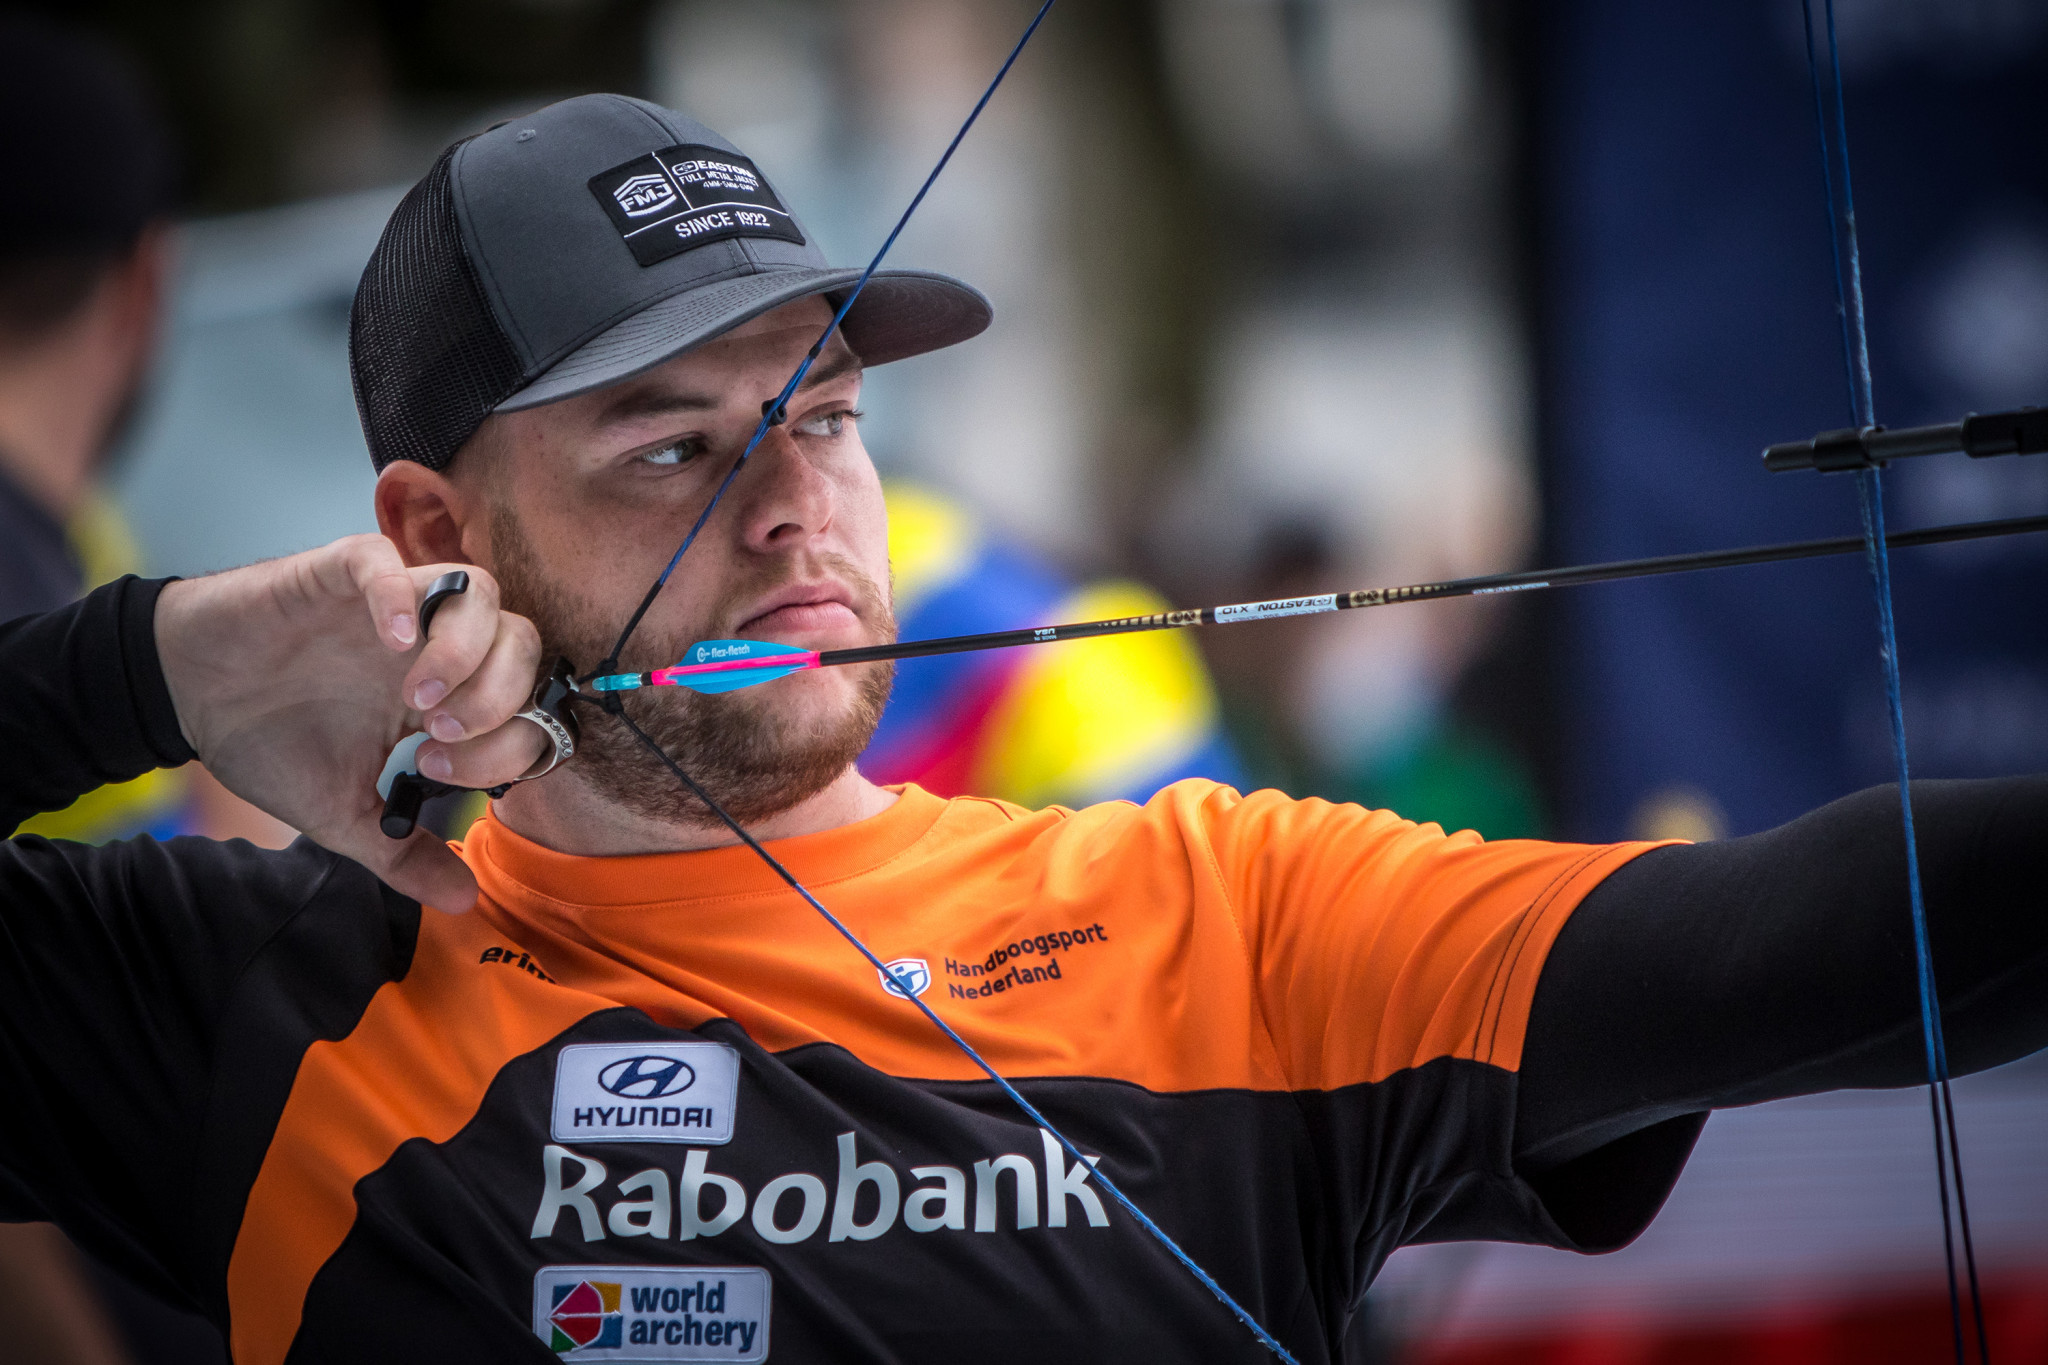 Mike Schloesser is the top compound archer after qualifying in Munich ©Getty Images